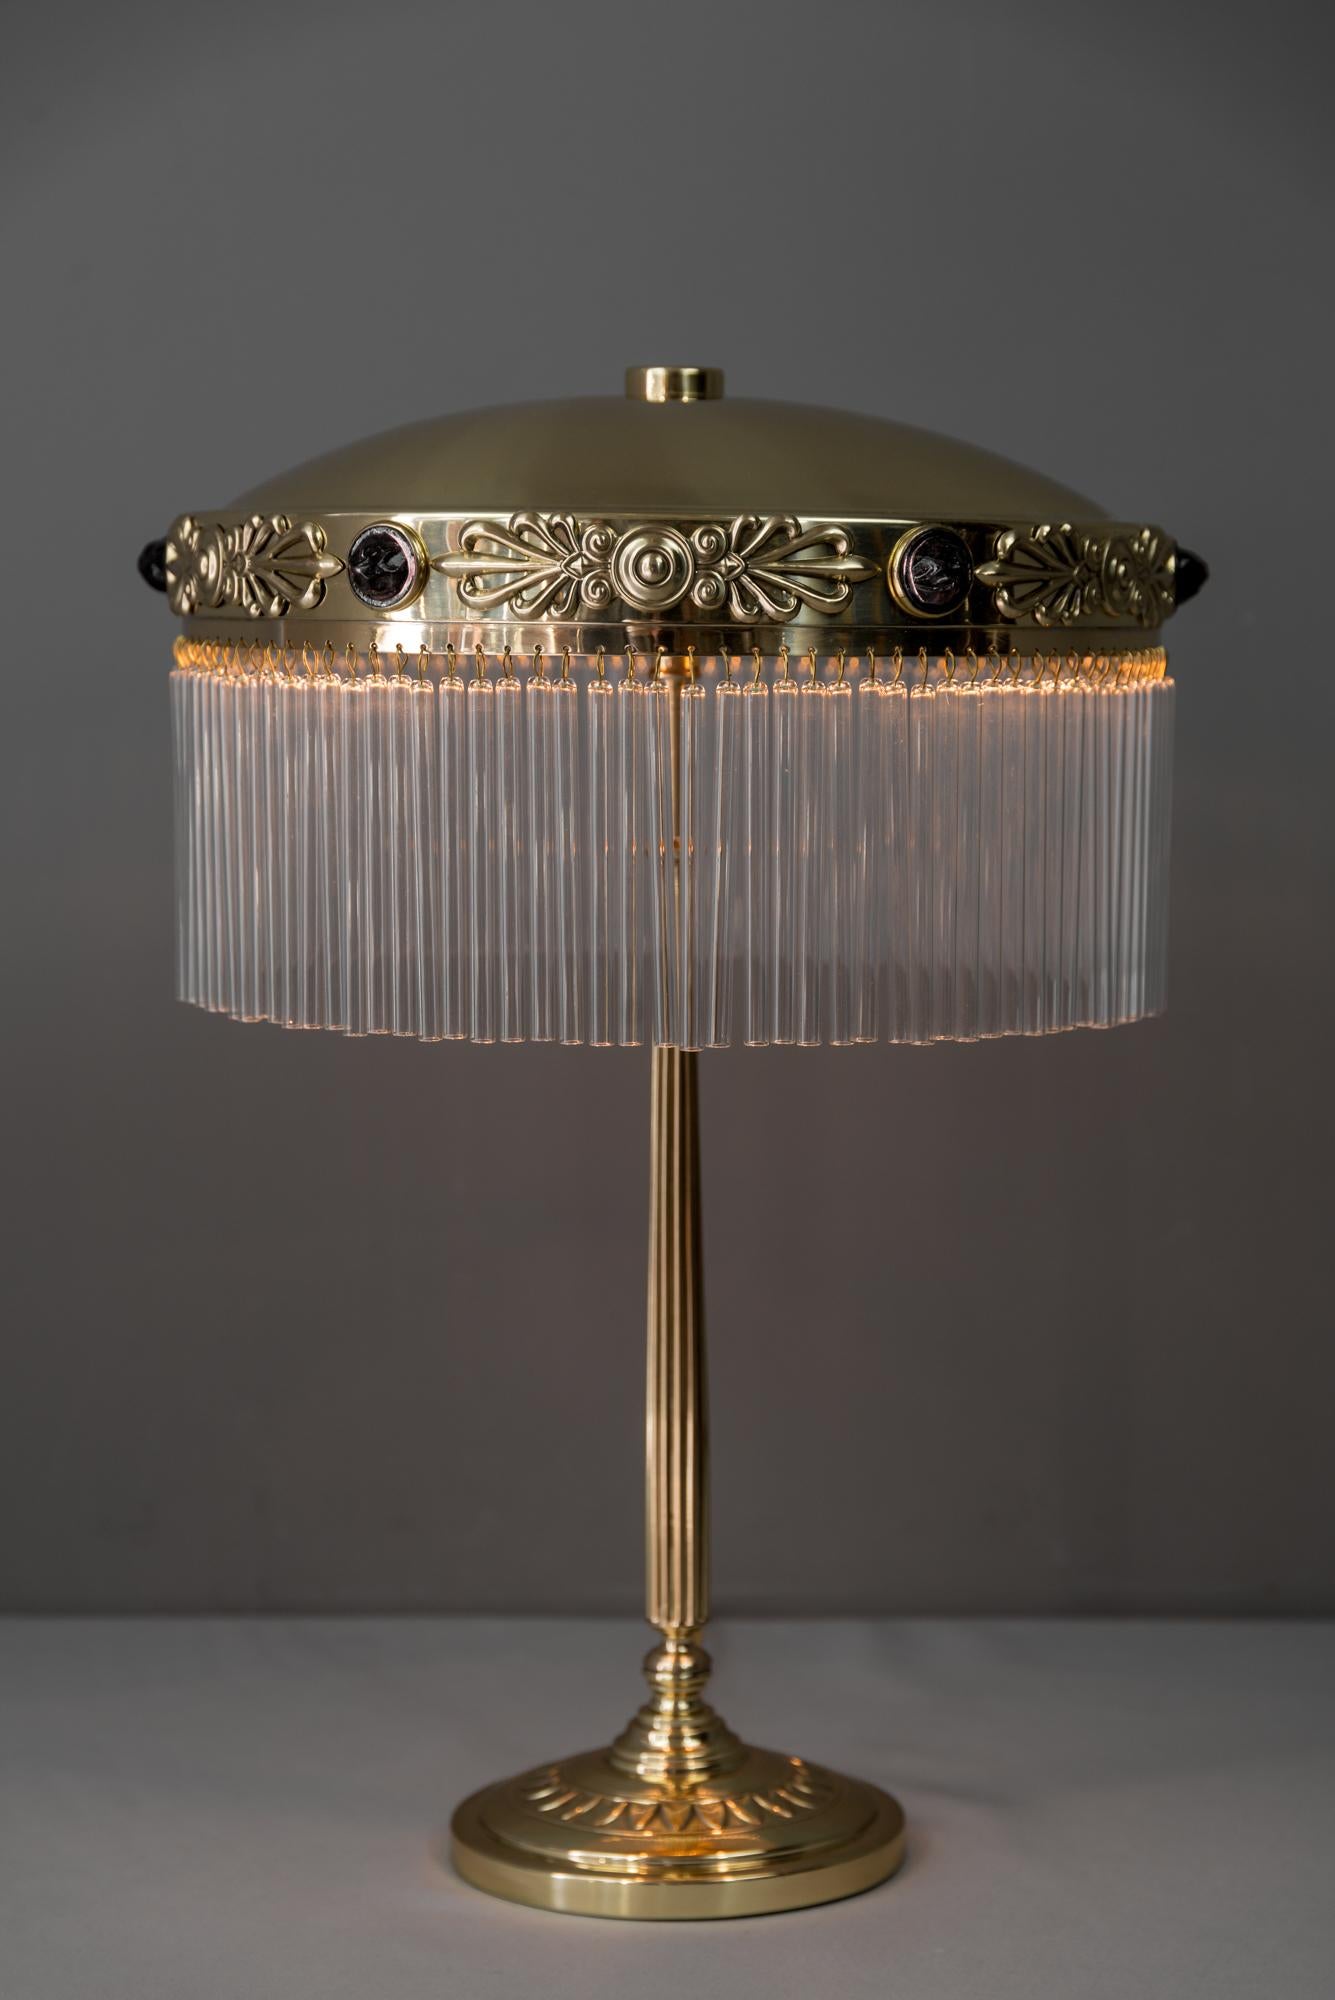 Jugendstil table lamp with red opaline stones circa 1908
Polished and stove enameled
Glassticks are replaced (new).